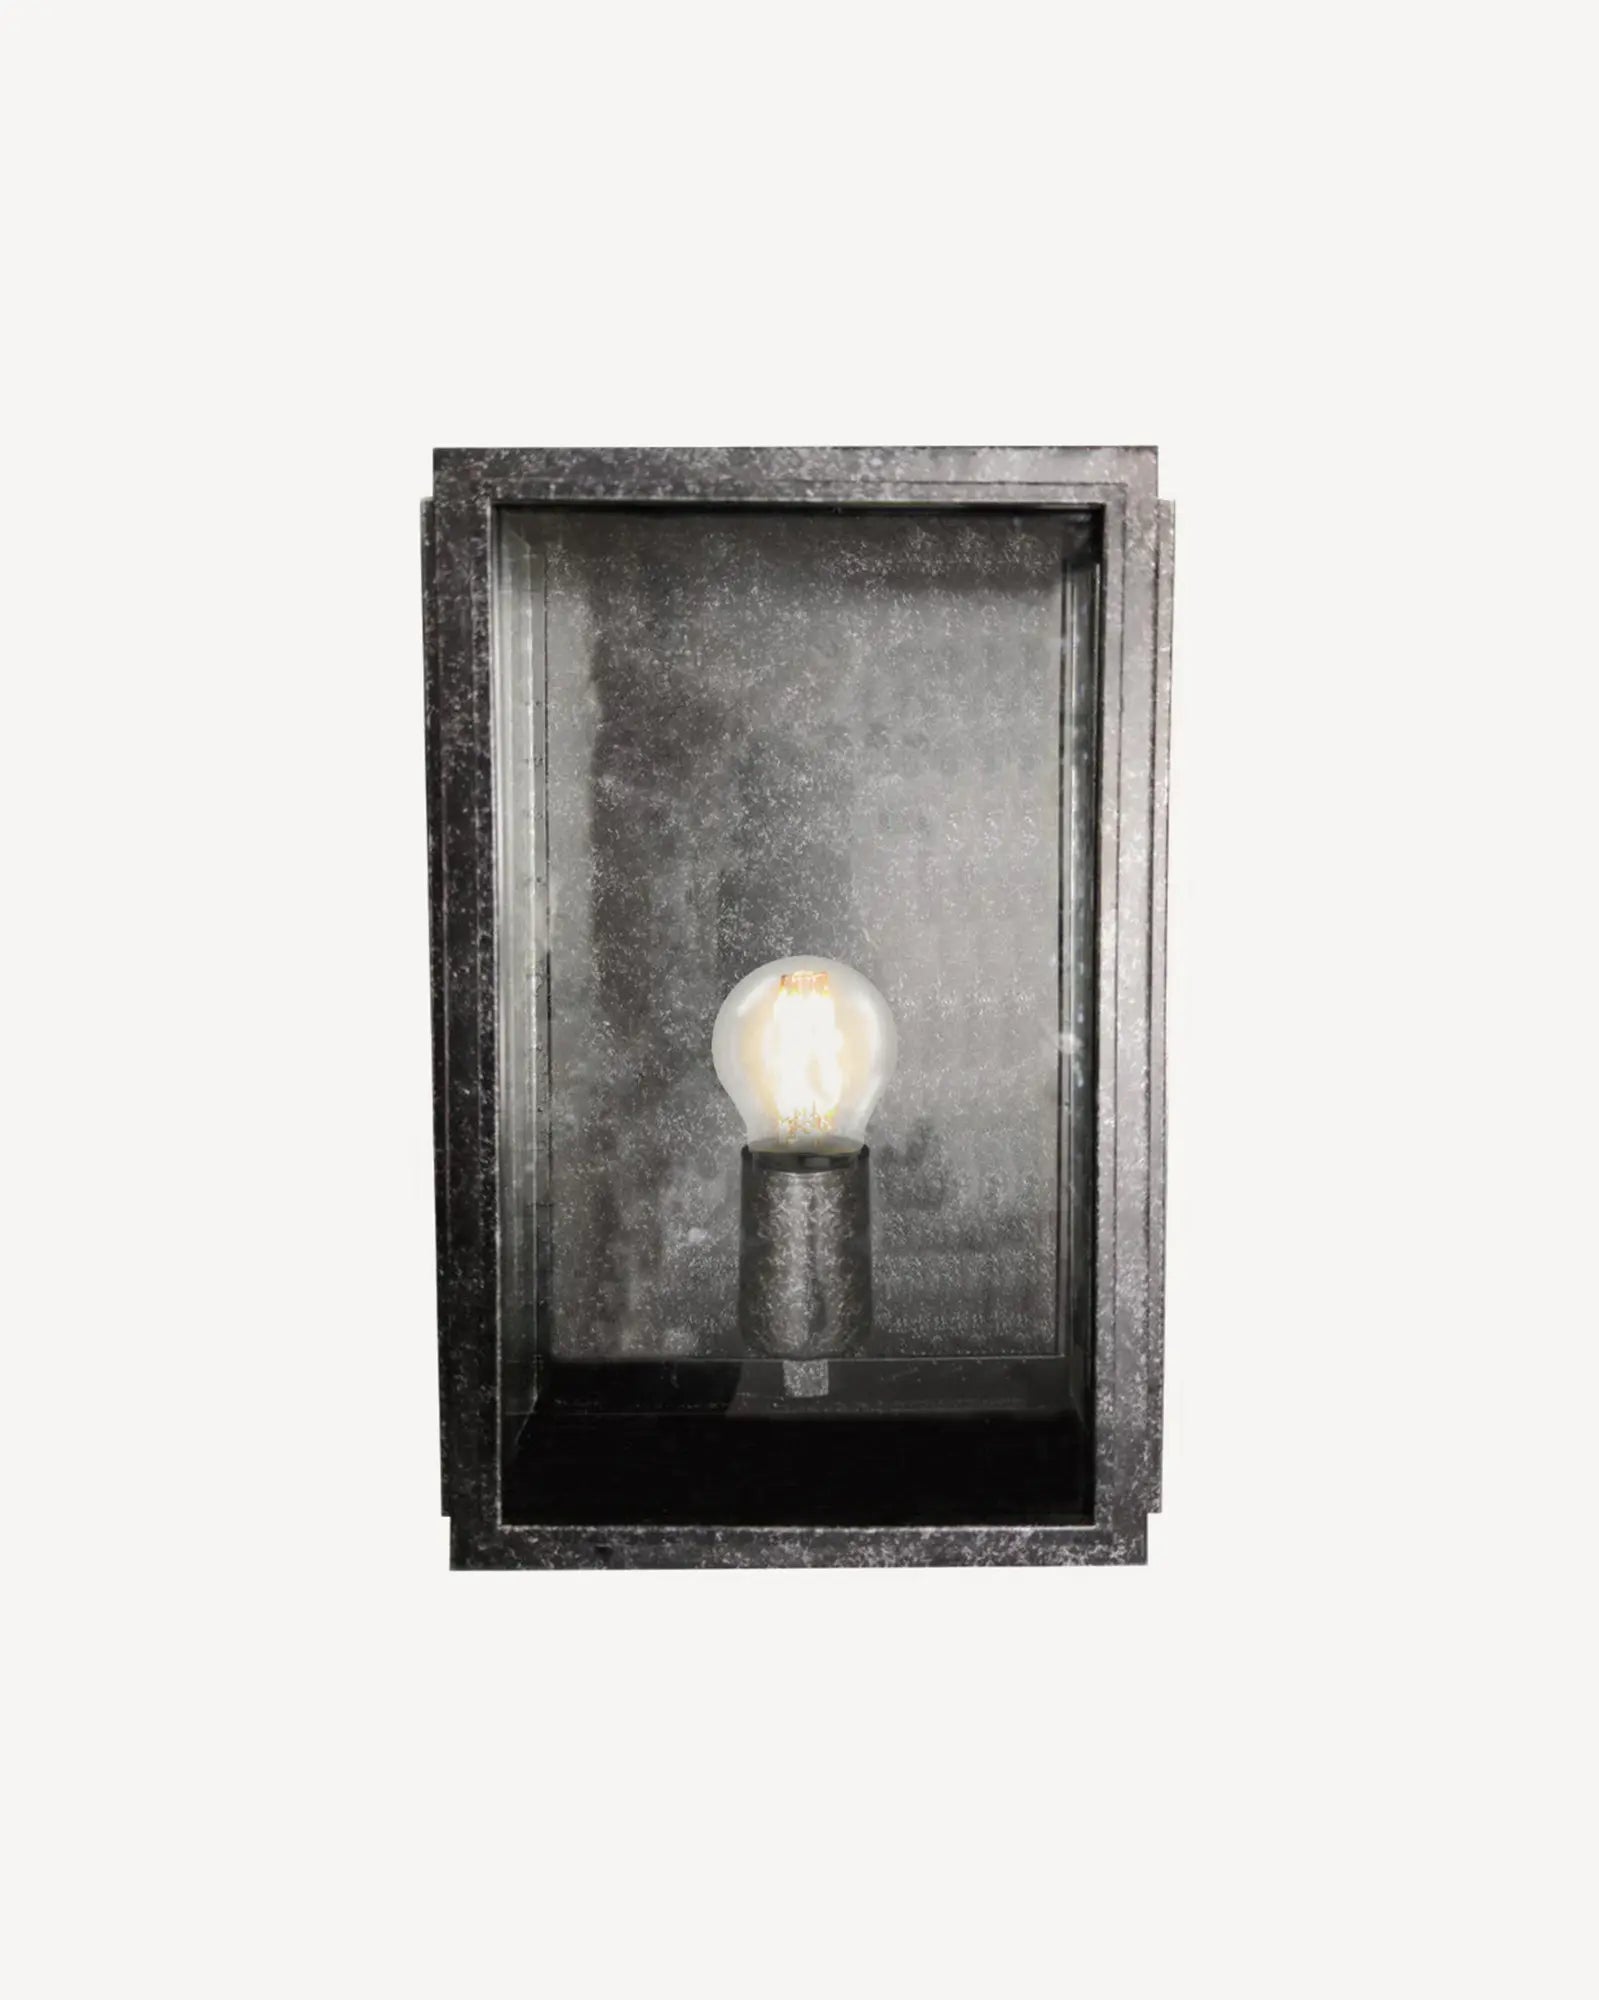 Frontage wall light by Inspiration Light at Nook Collections